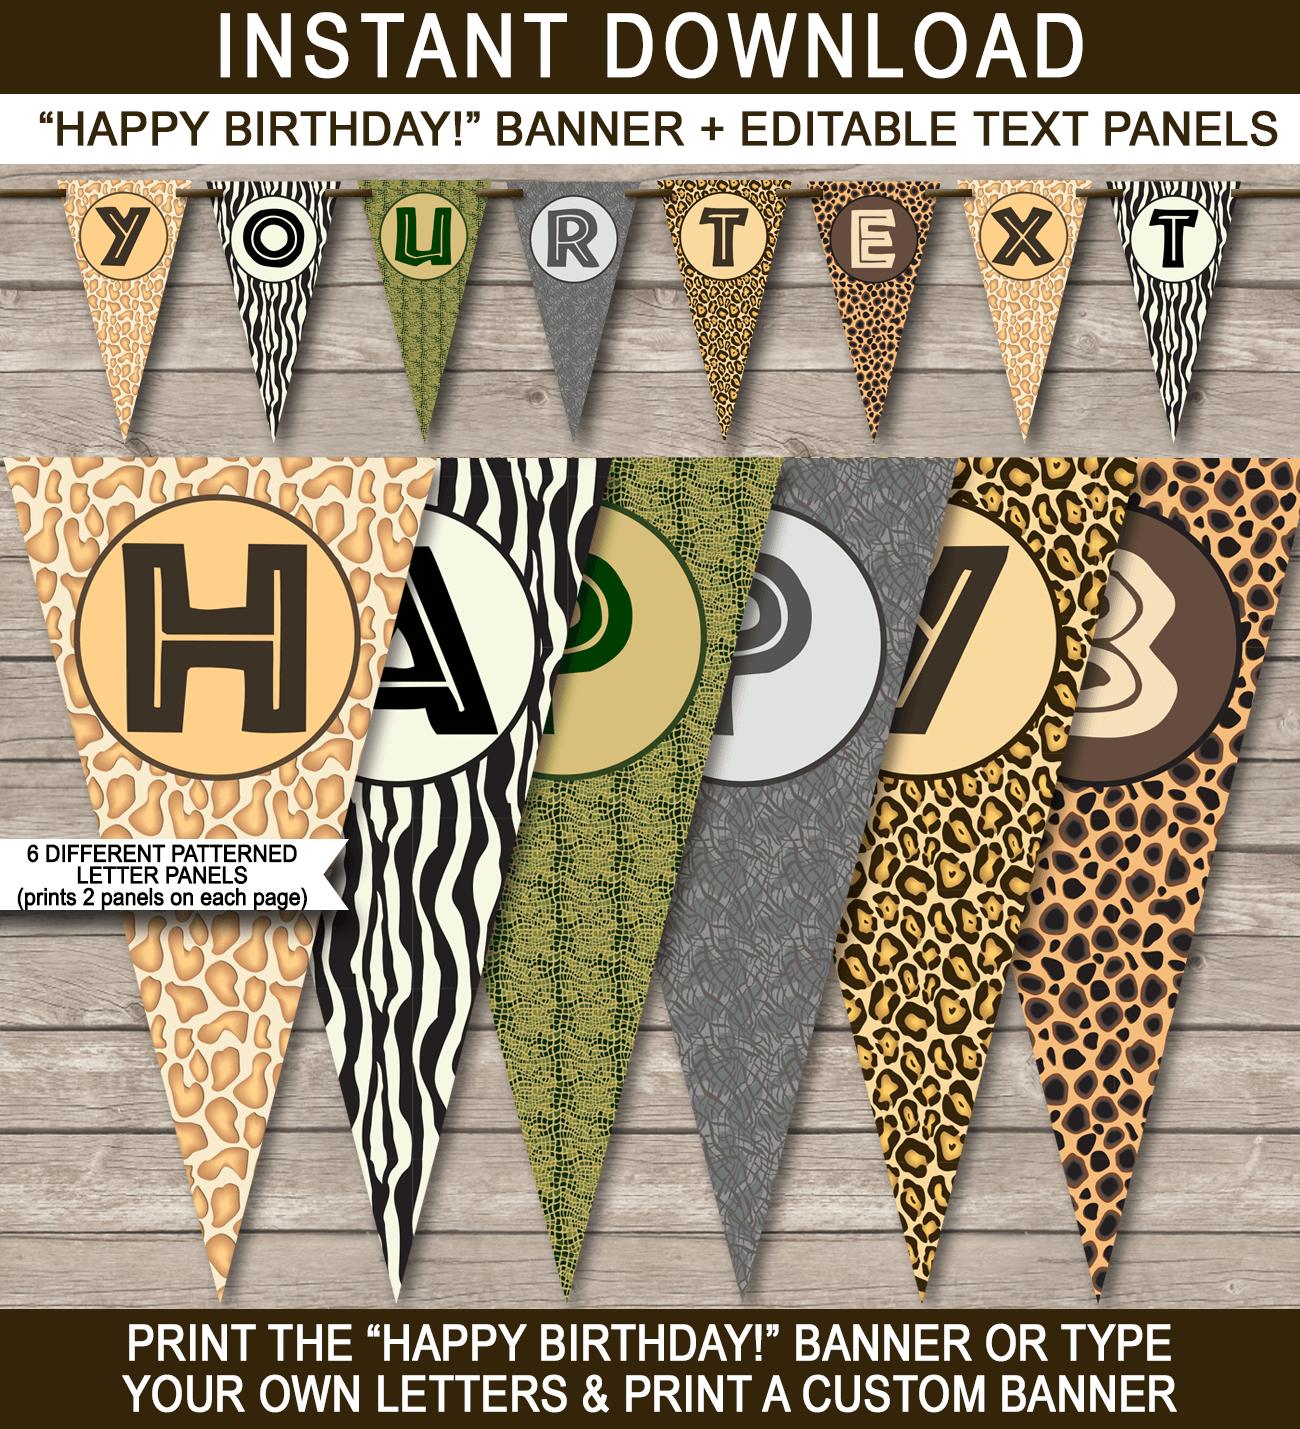 Zoo or Safari Party Banner Template - Bunting - Happy Birthday Banner - Birthday Party - Editable and Printable DIY Template - INSTANT DOWNLOAD $4.50 via simonemadeit.com